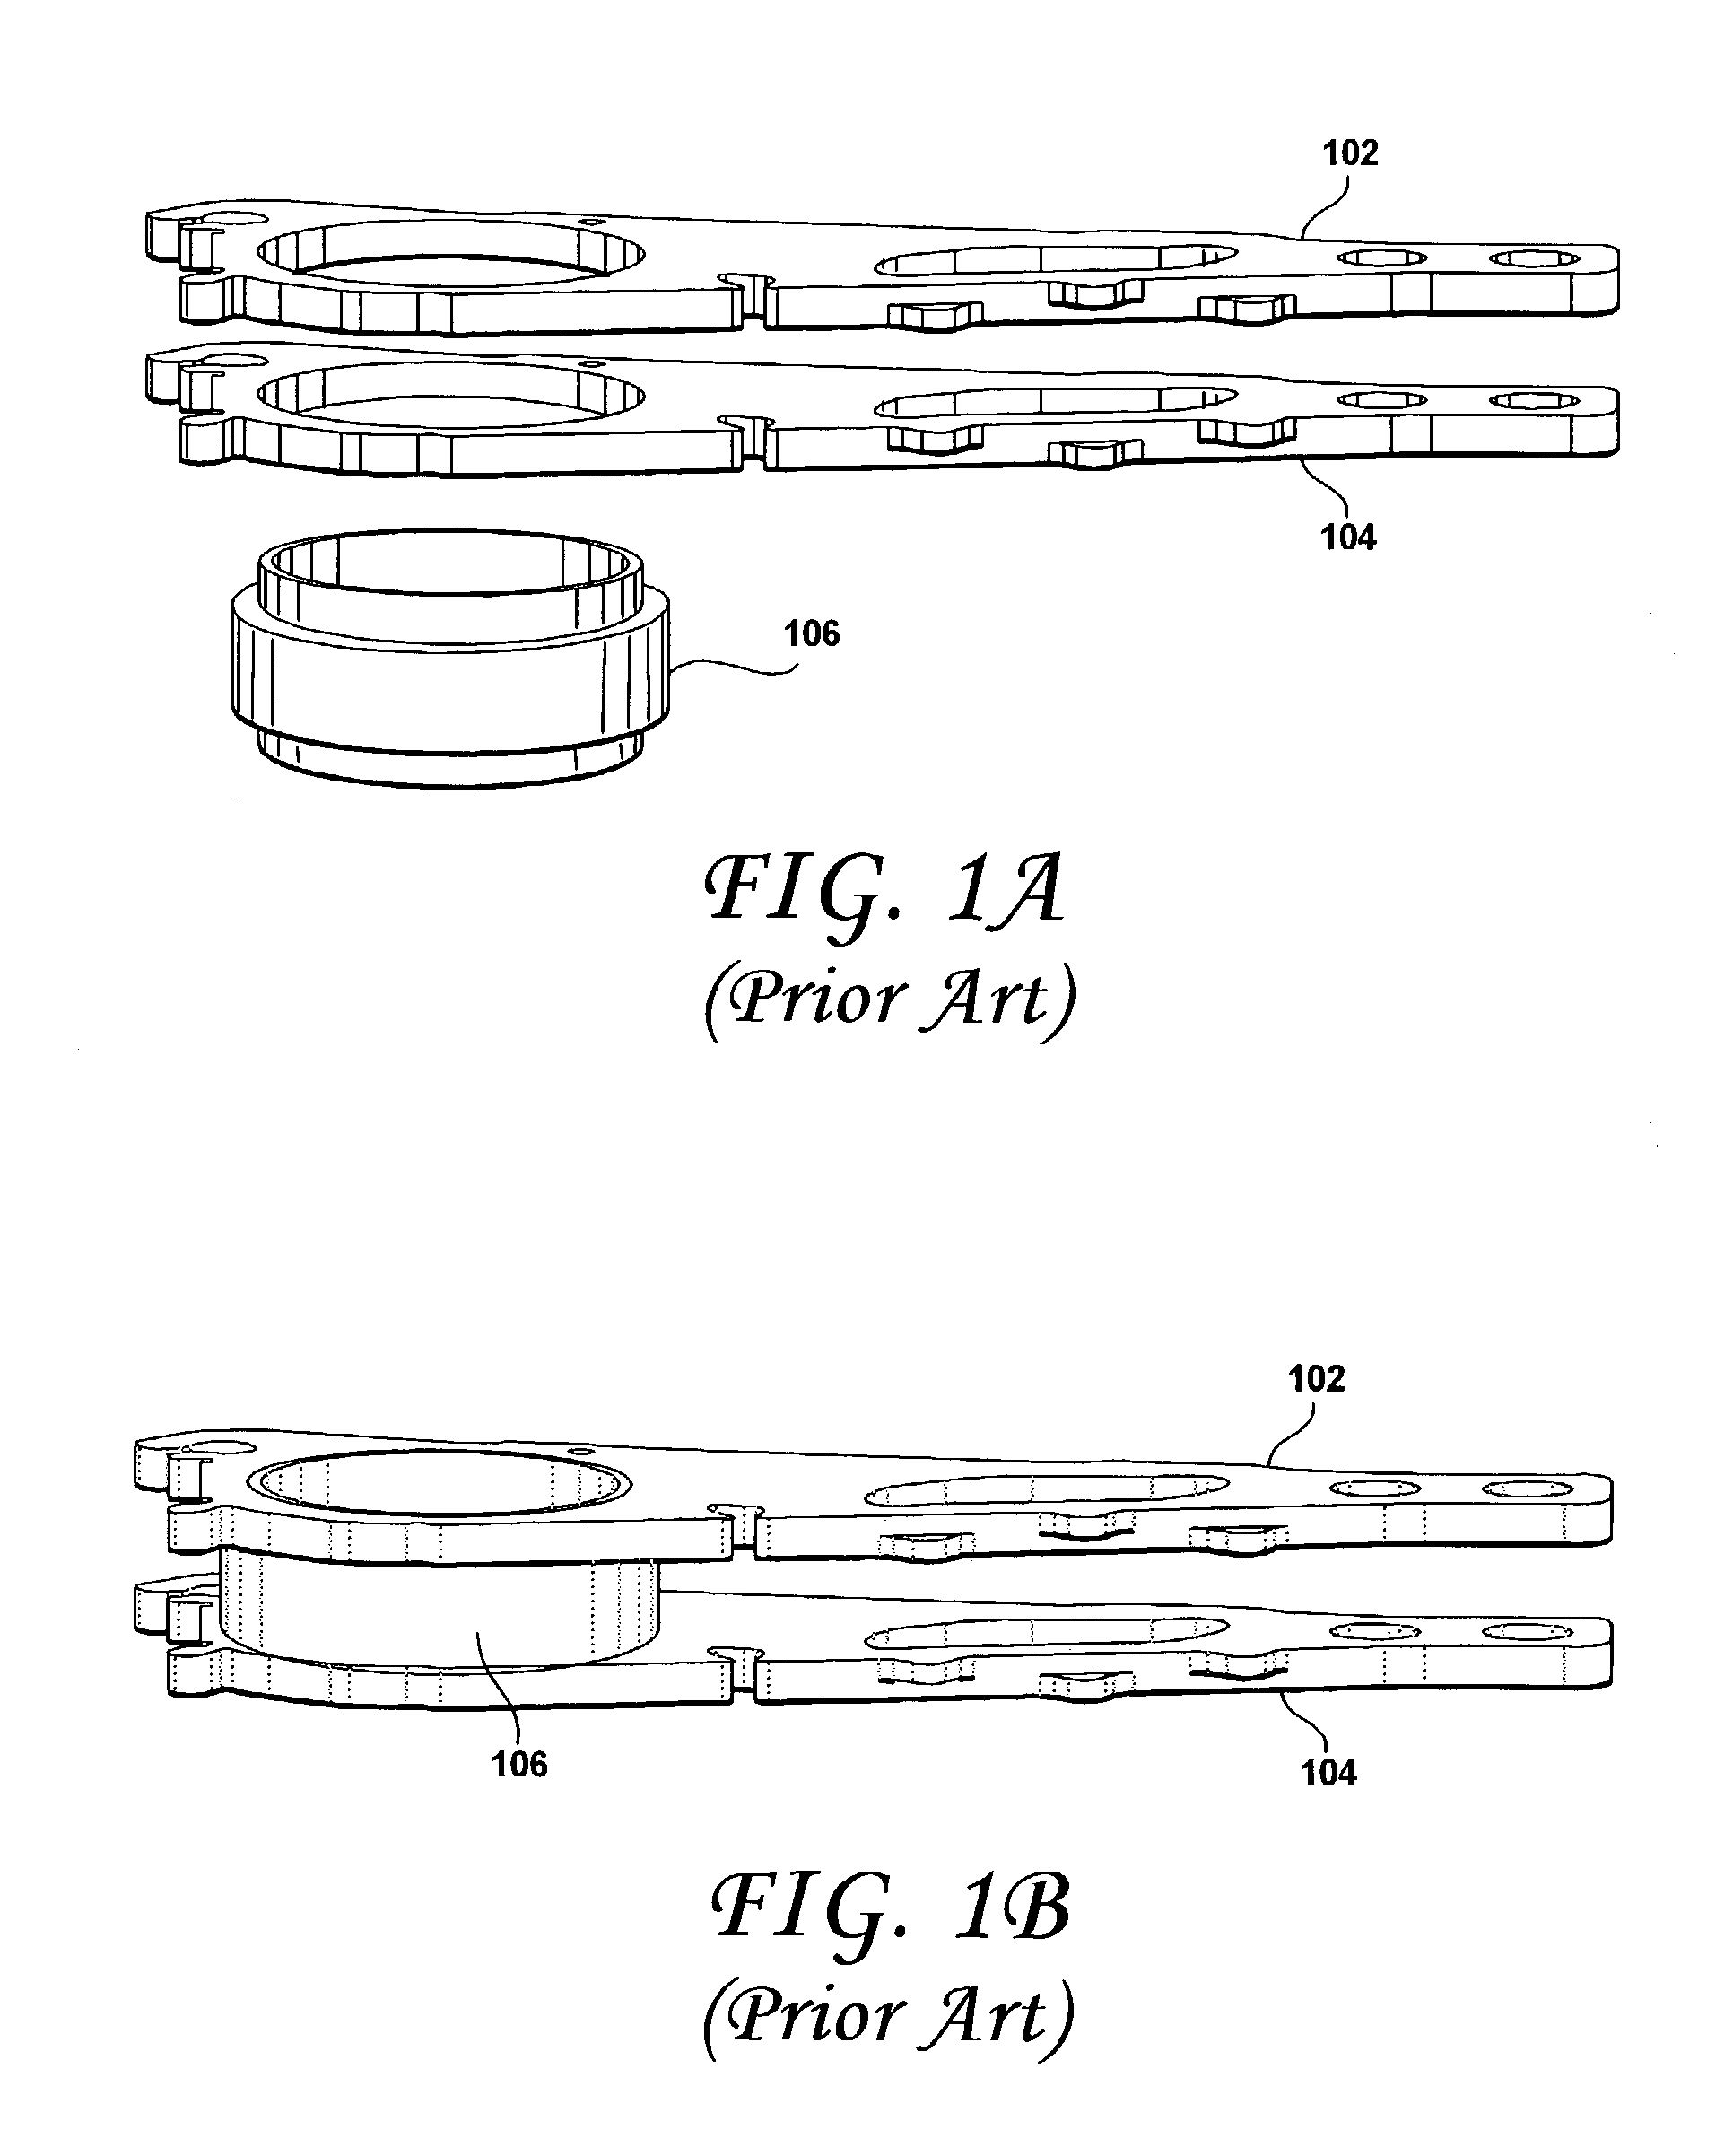 Disk drive including a stamped arm assembly and method of making an actuator arm assembly